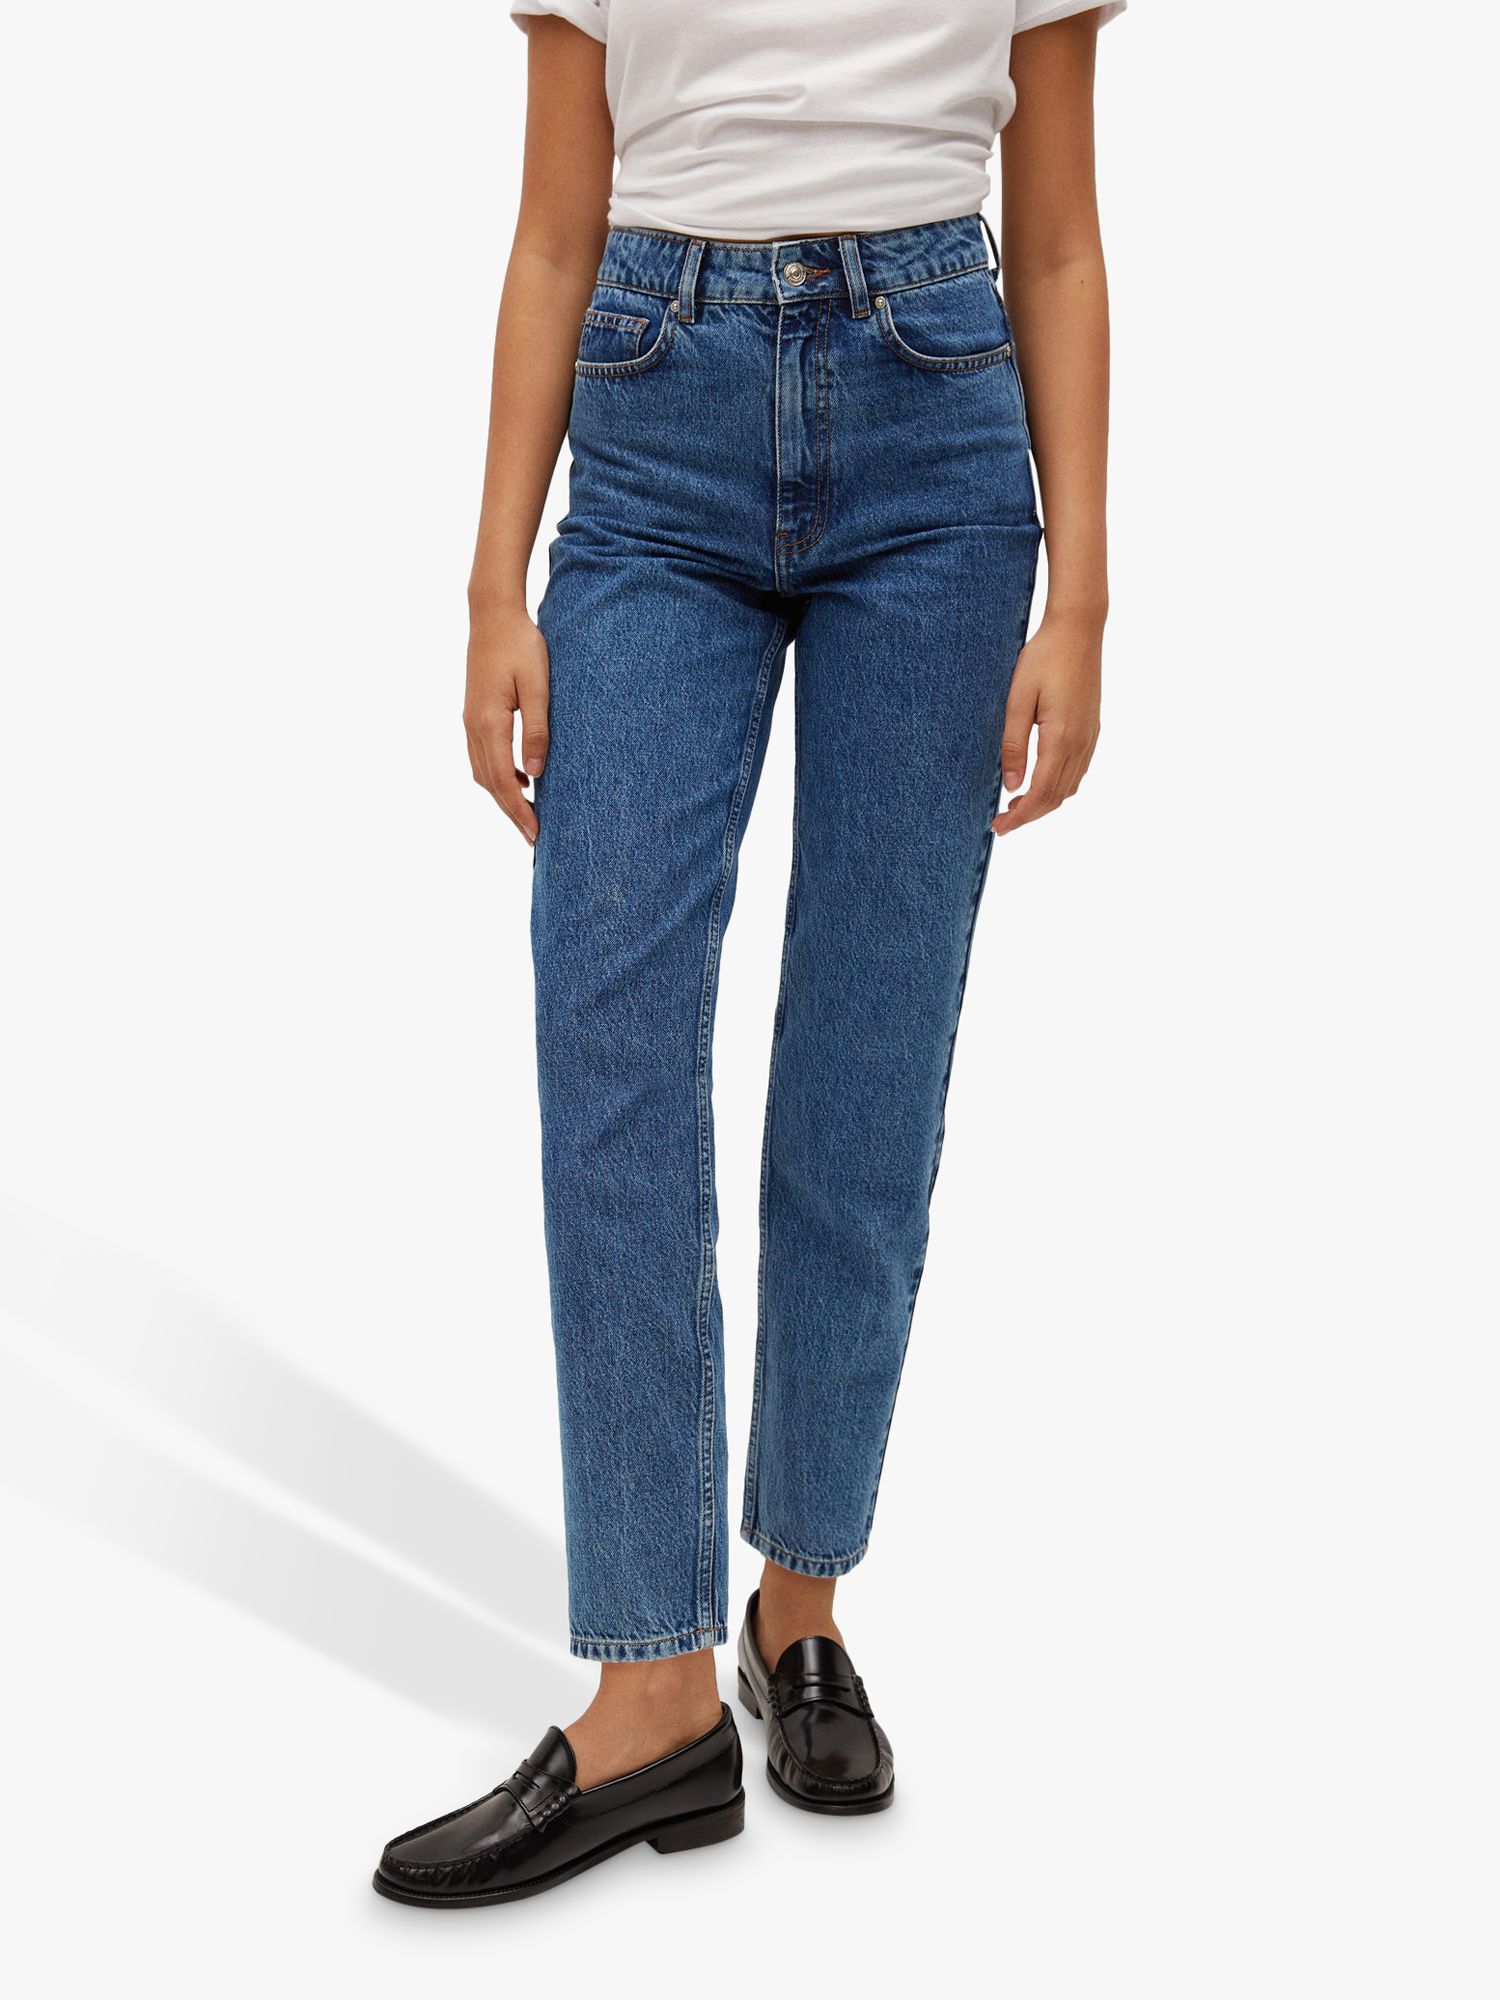 Mango Fit High Jeans, Mid Blue at John Lewis & Partners